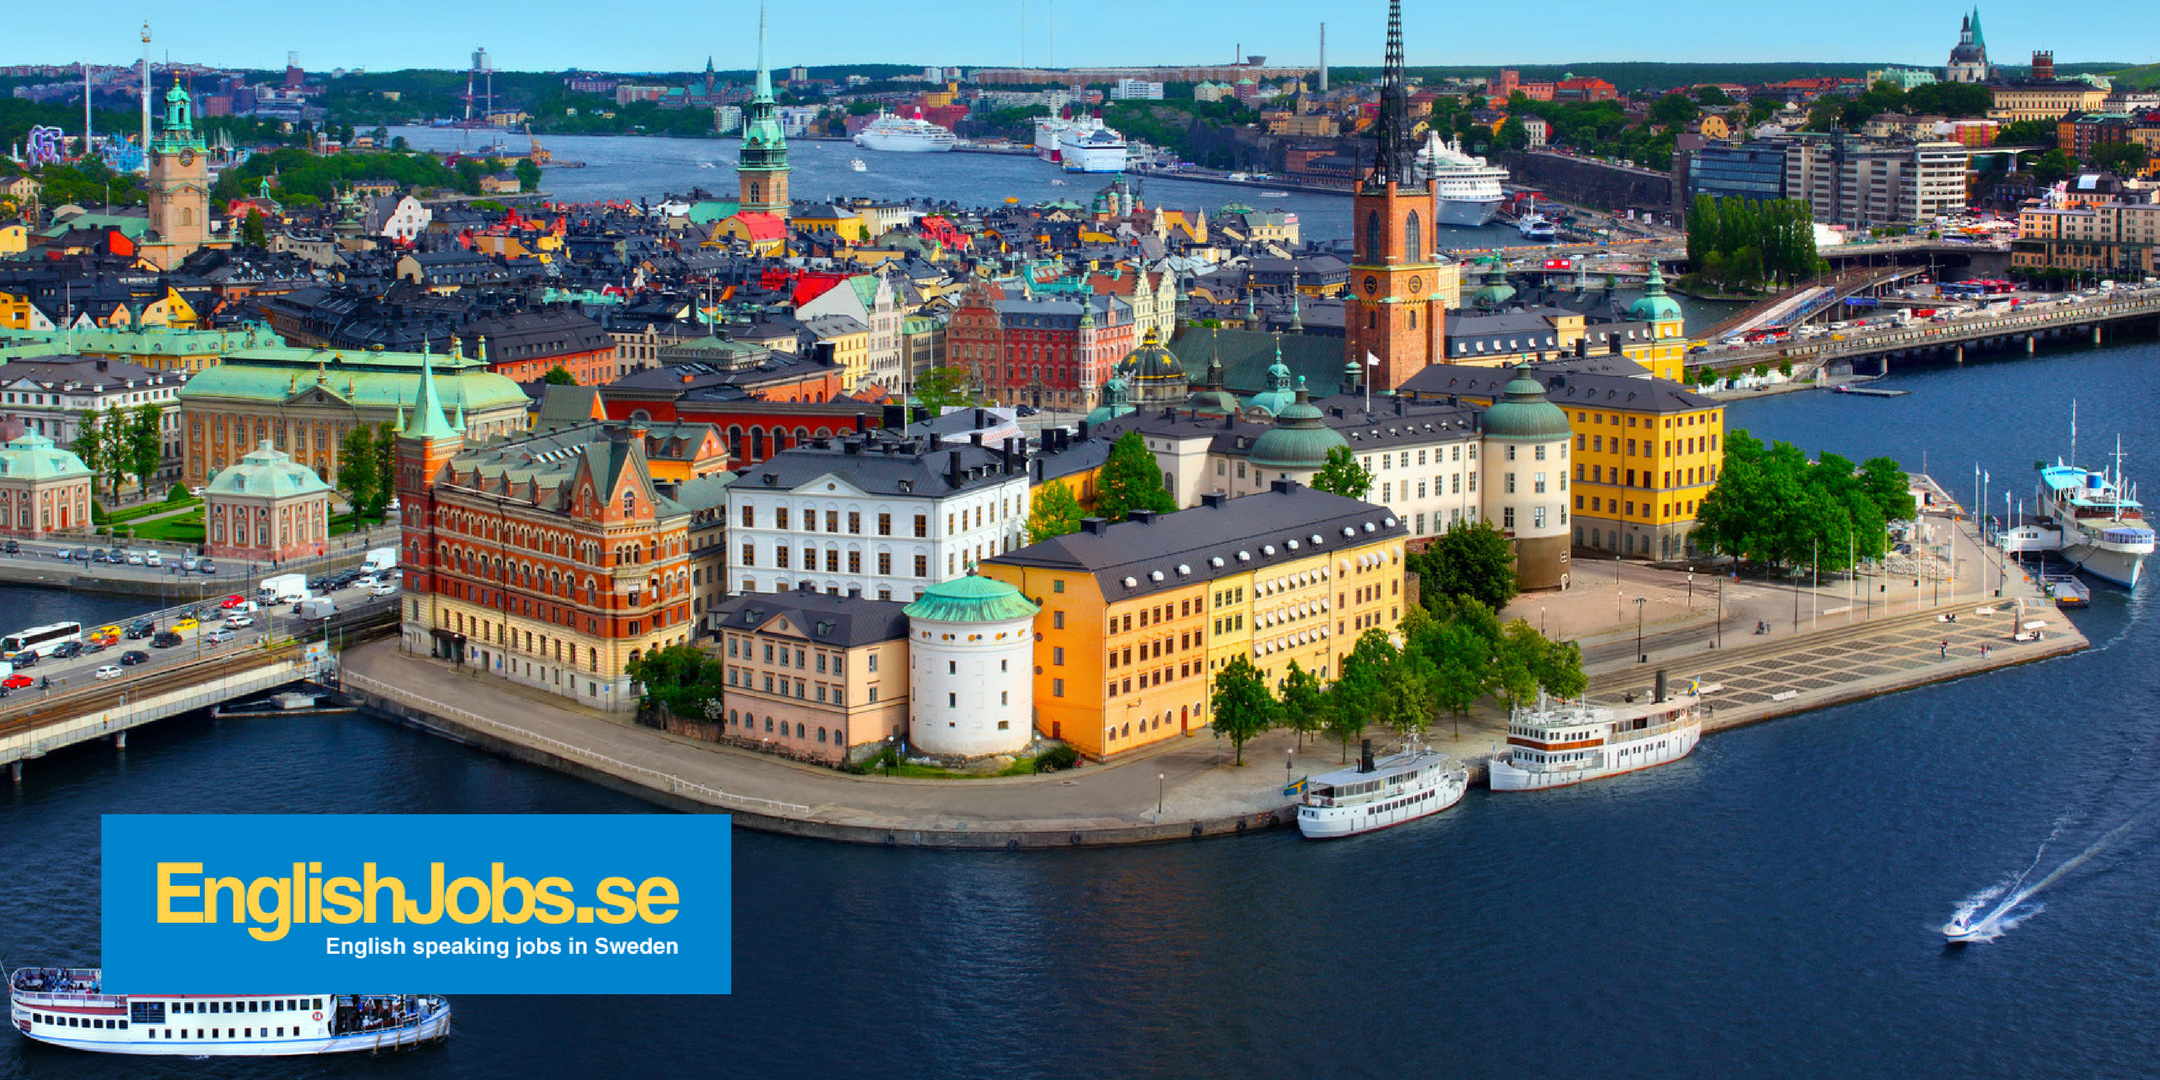 Work in Europe (Sweden, Denmark, Germany) - Your job search from Chicago to Stockholm